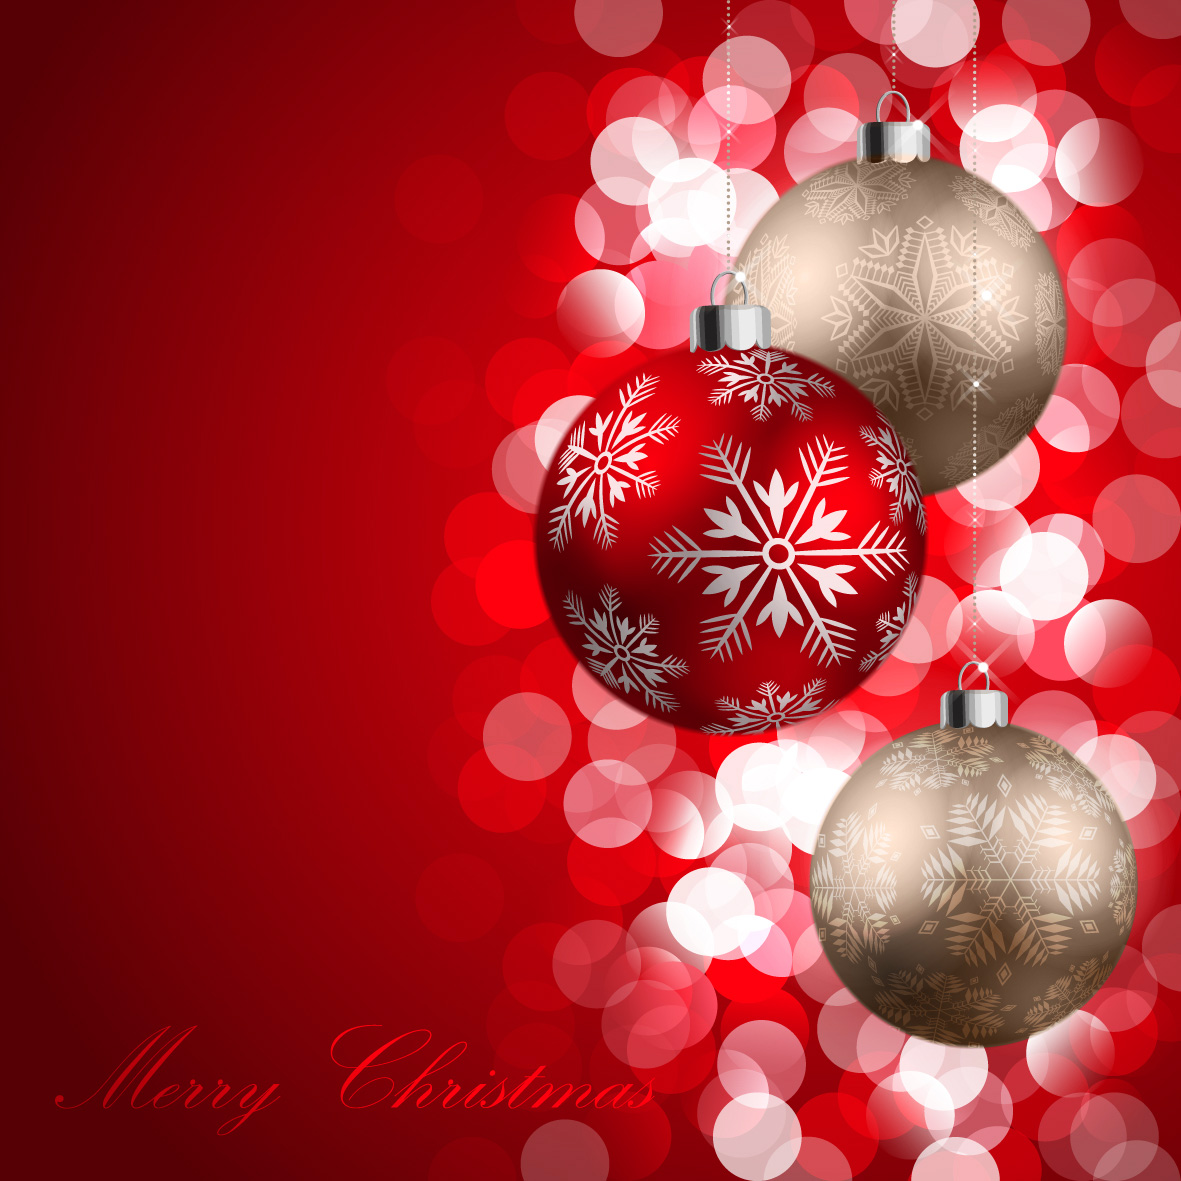 Merry Christmas Red Background with Ornaments​-Quality Free Image and Transparent PNG Clipart